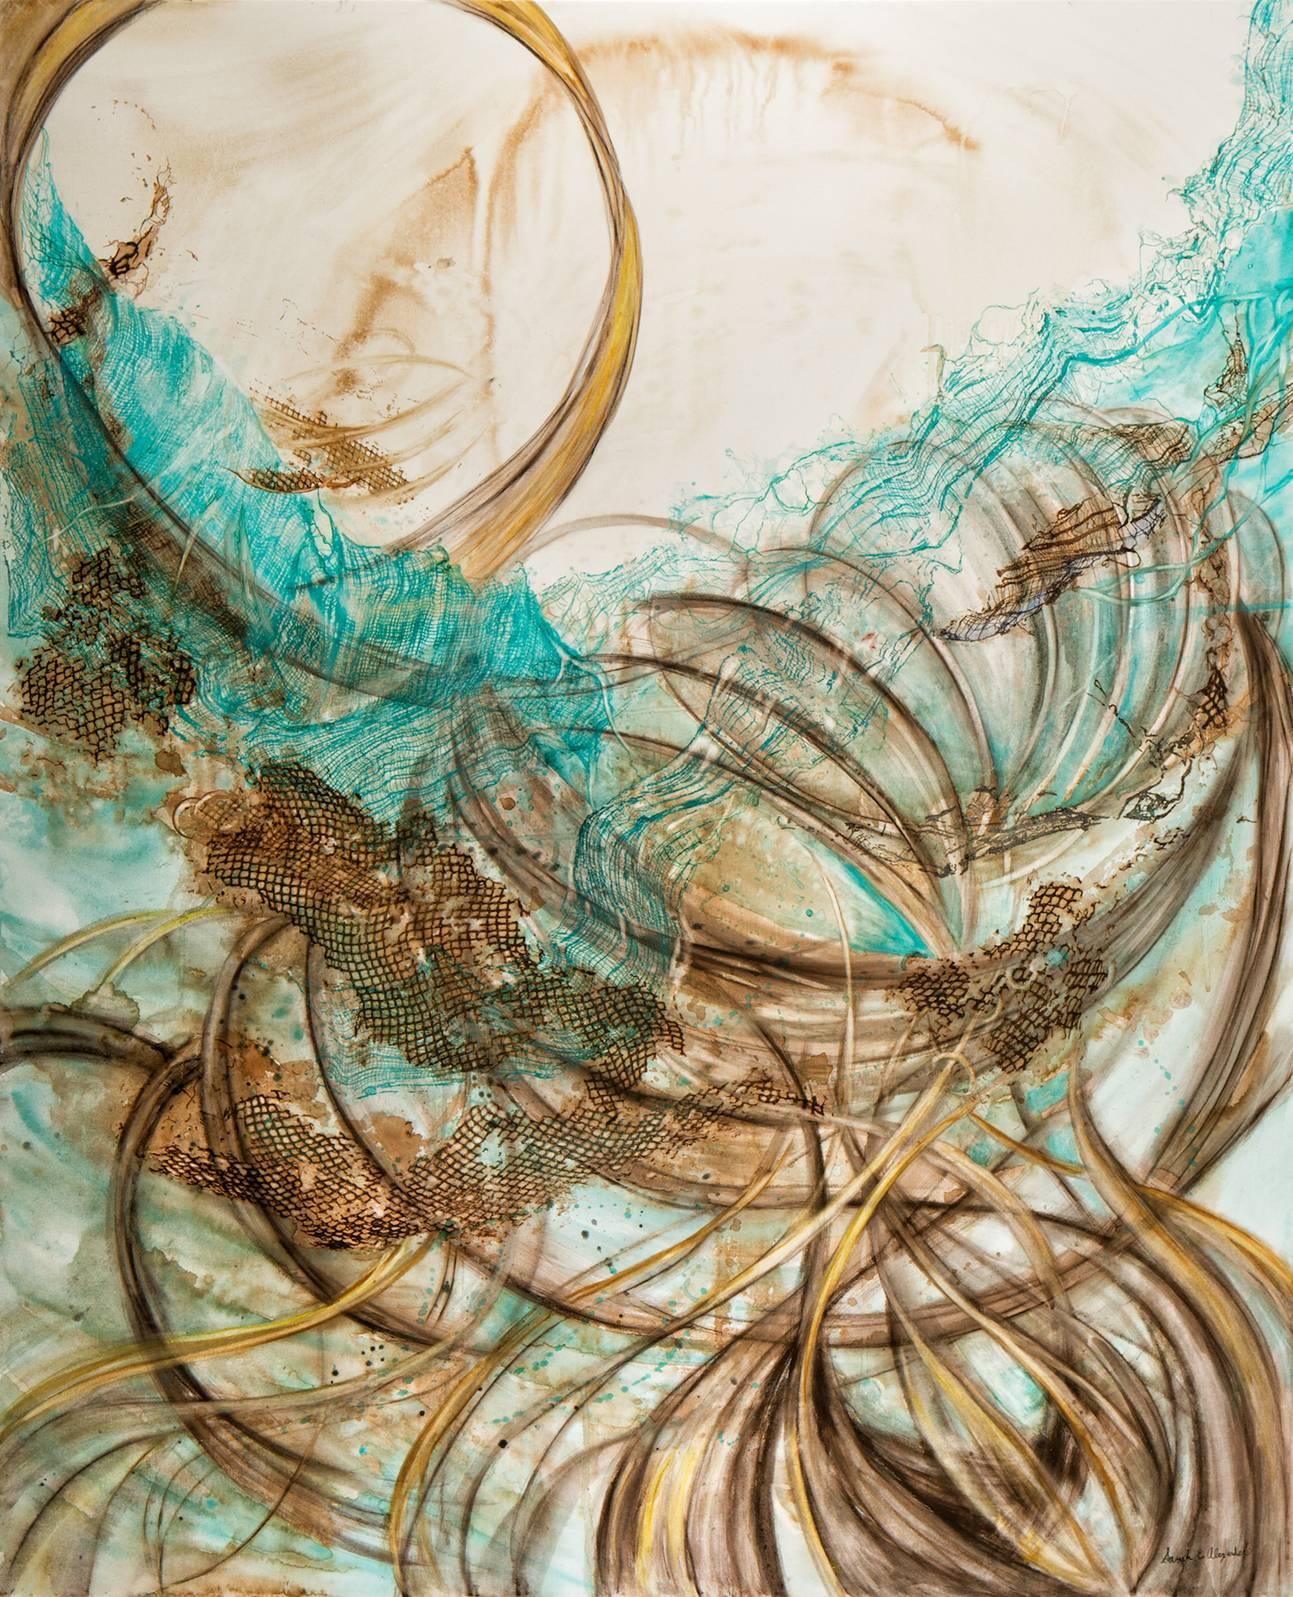 Abstract Painting Sarah Alexander - "In Flux", abstrait, turquoise, Brown, mixed media, aquarelle, peinture